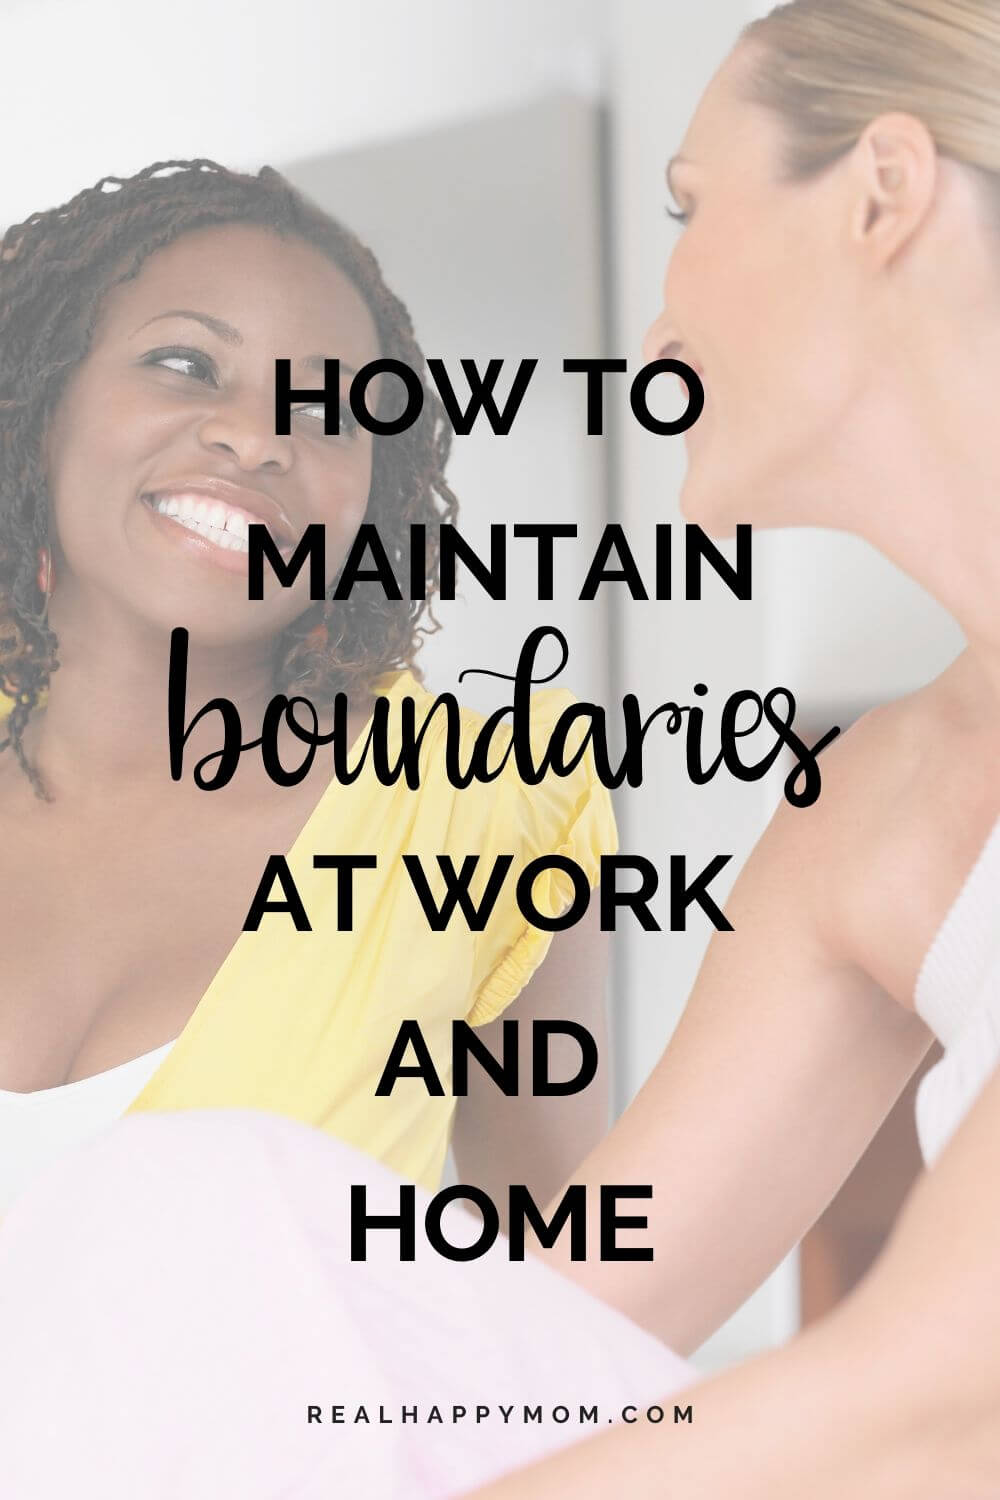 How To Maintain Boundaries At Work And Home